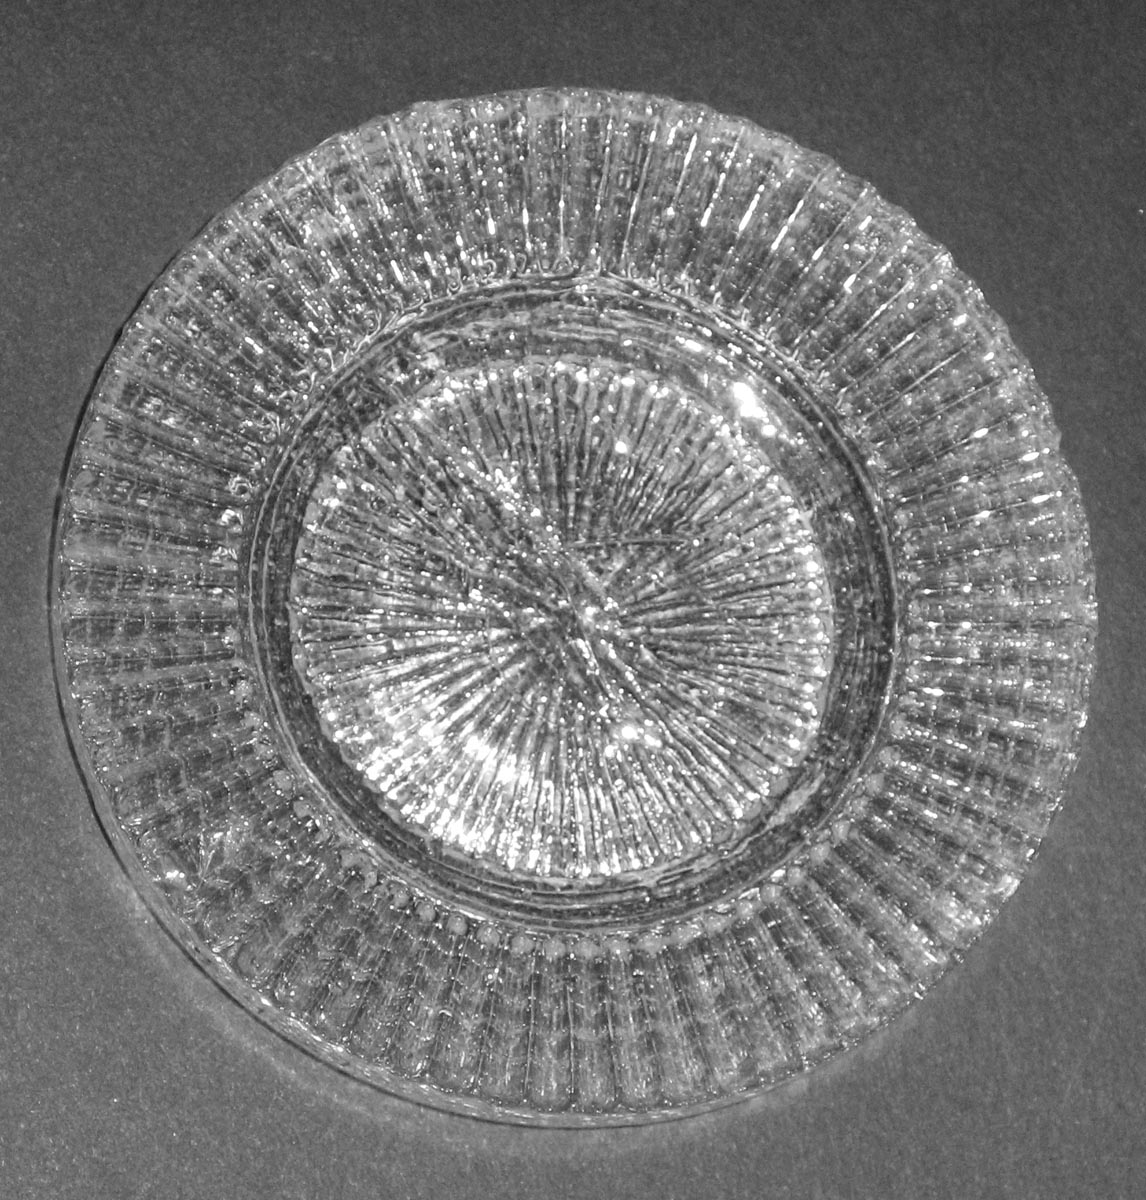 2003.0041.029 Glass cup plate